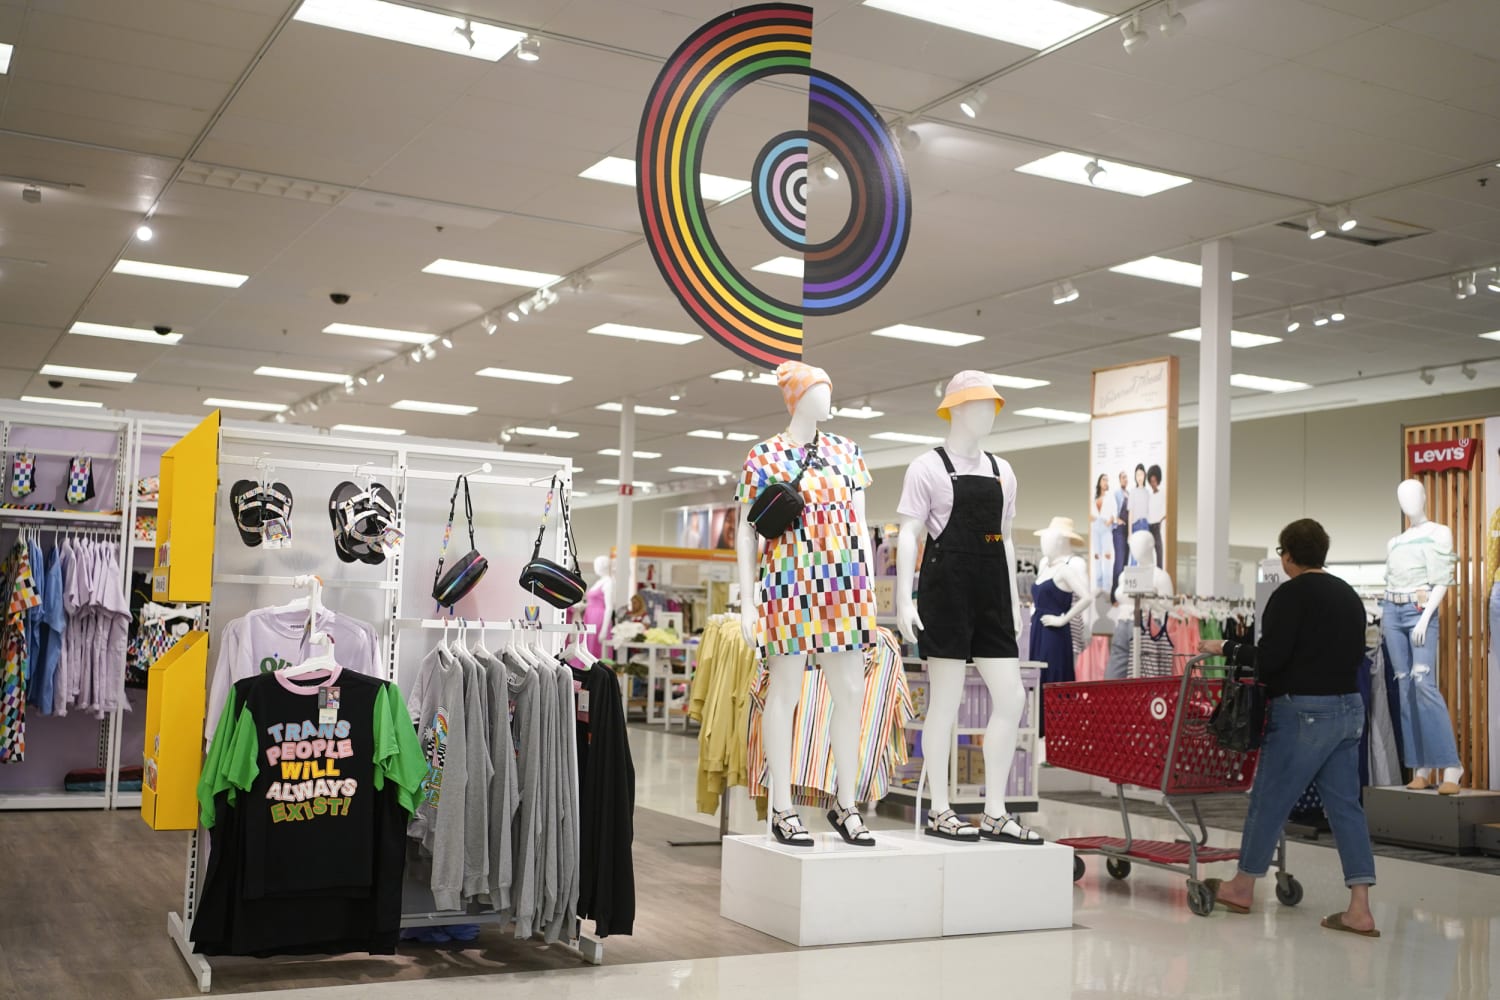 Target quietly moves Pride merchandise in some stores as conservative activists declare victory